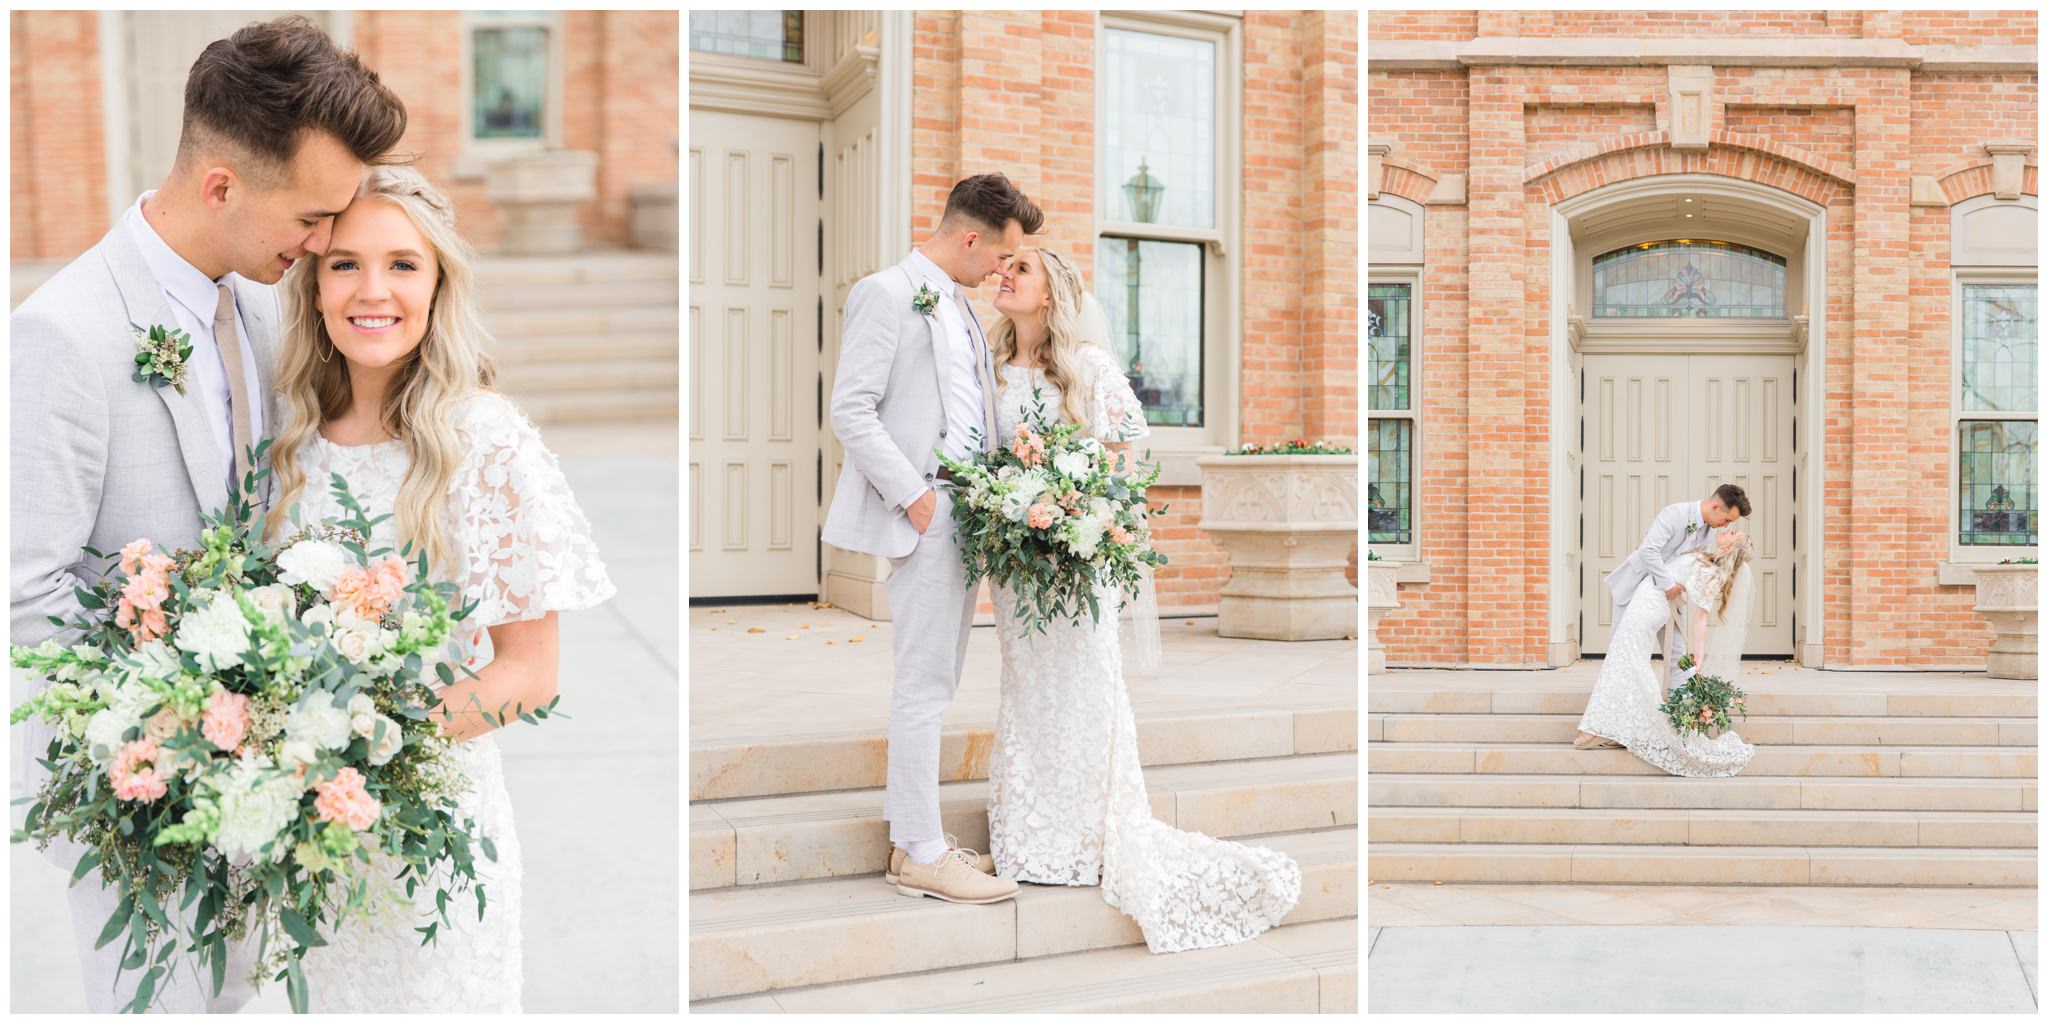 Bride and Groom formals at the Provo City Center Temple